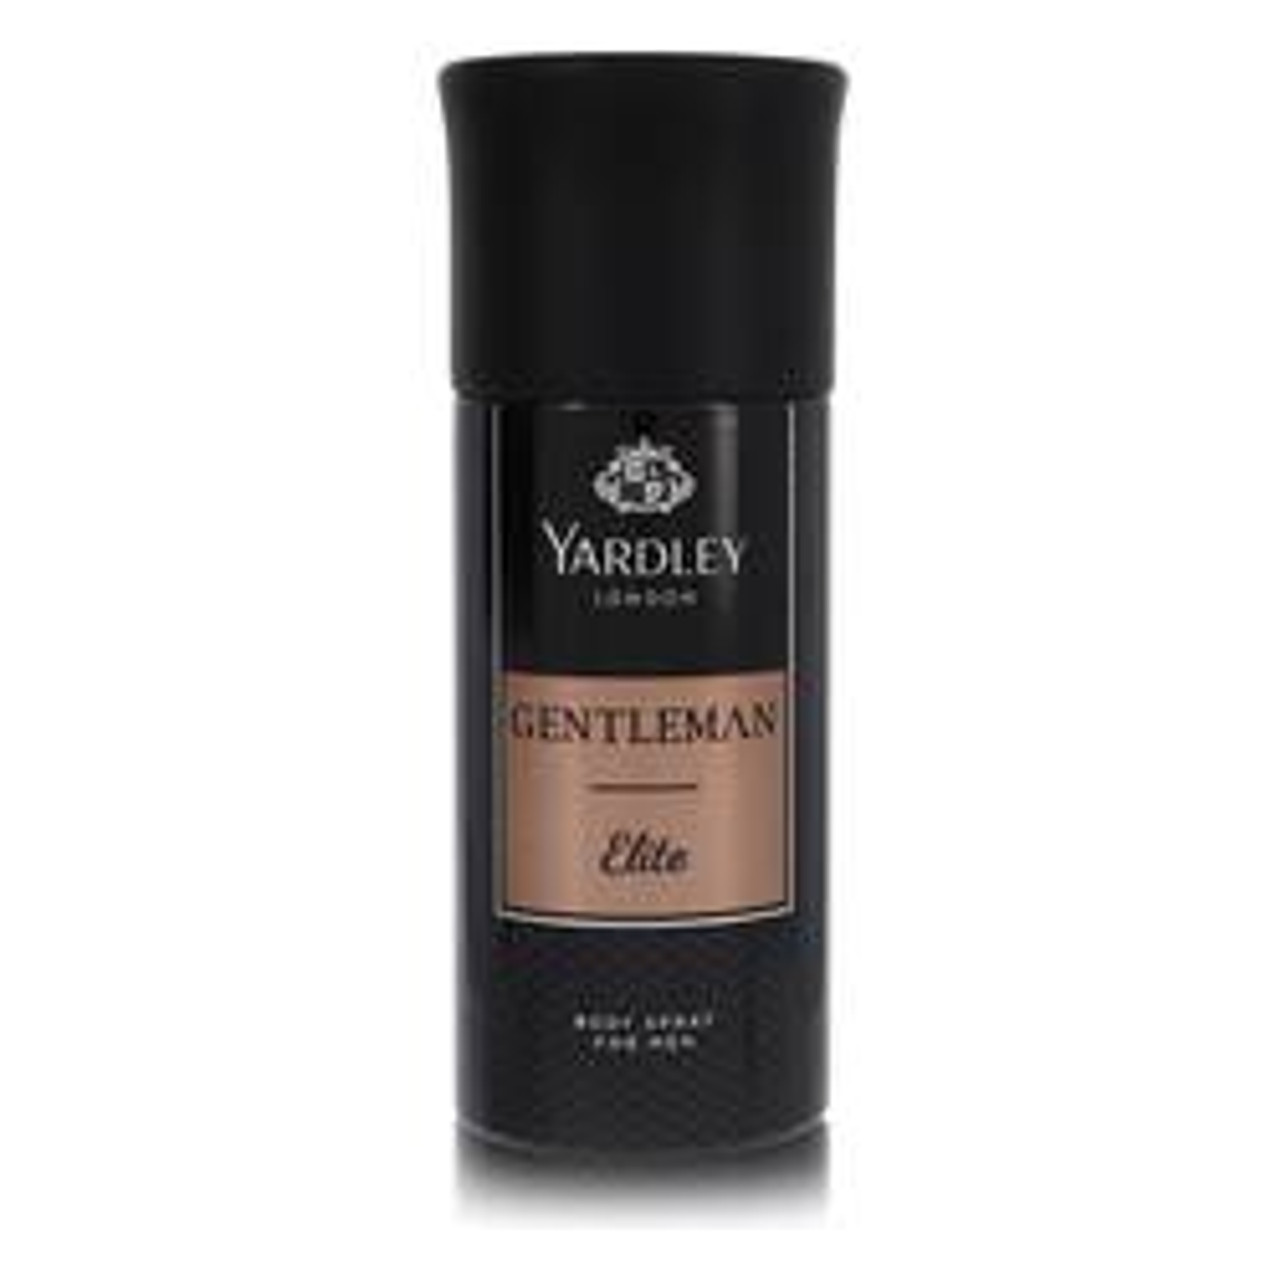 Yardley Gentleman Elite Cologne By Yardley London Deodorant Body Spray 5 oz for Men - [From 35.00 - Choose pk Qty ] - *Ships from Miami